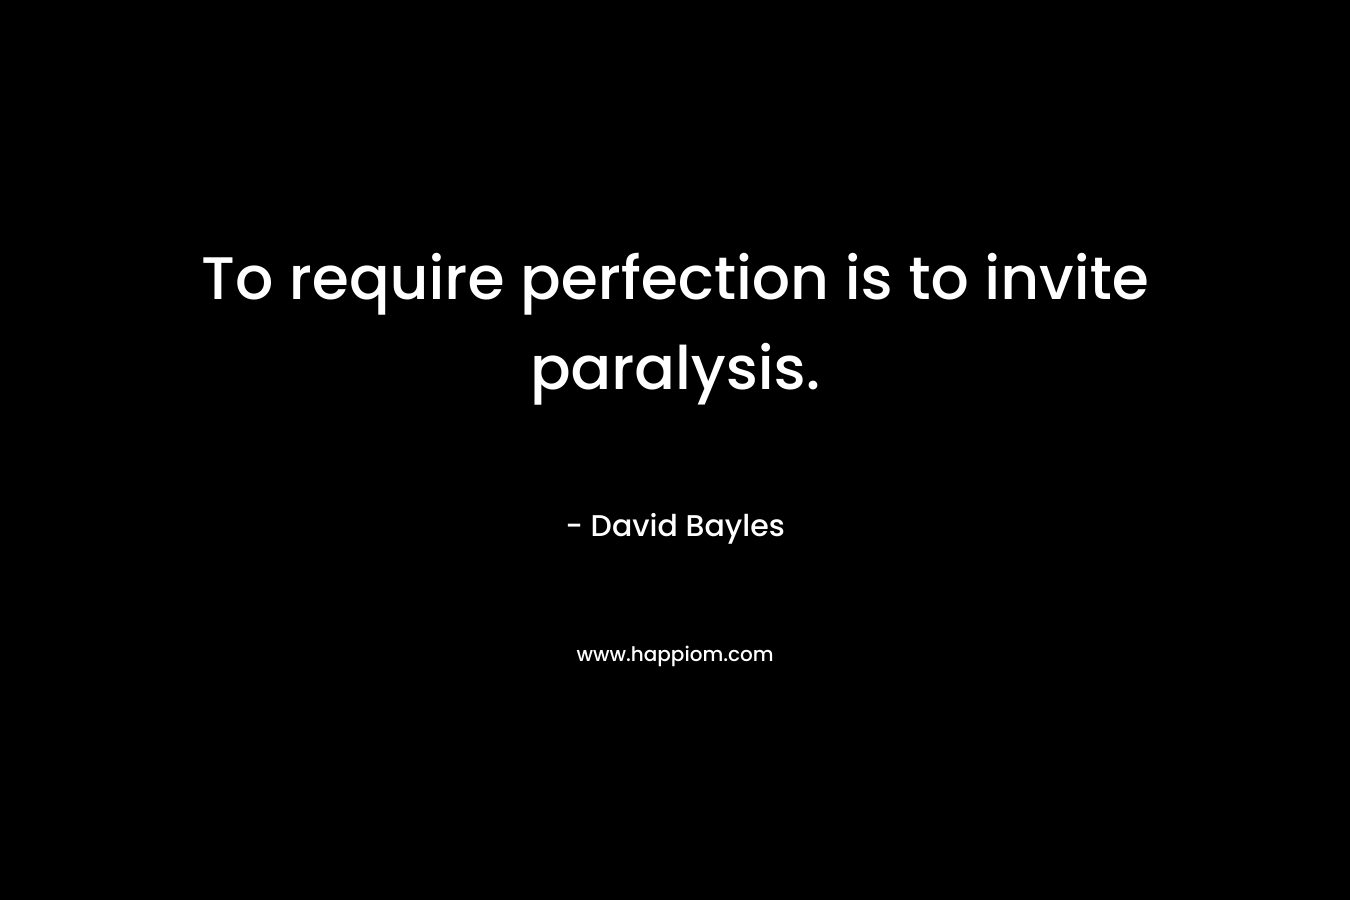 To require perfection is to invite paralysis.